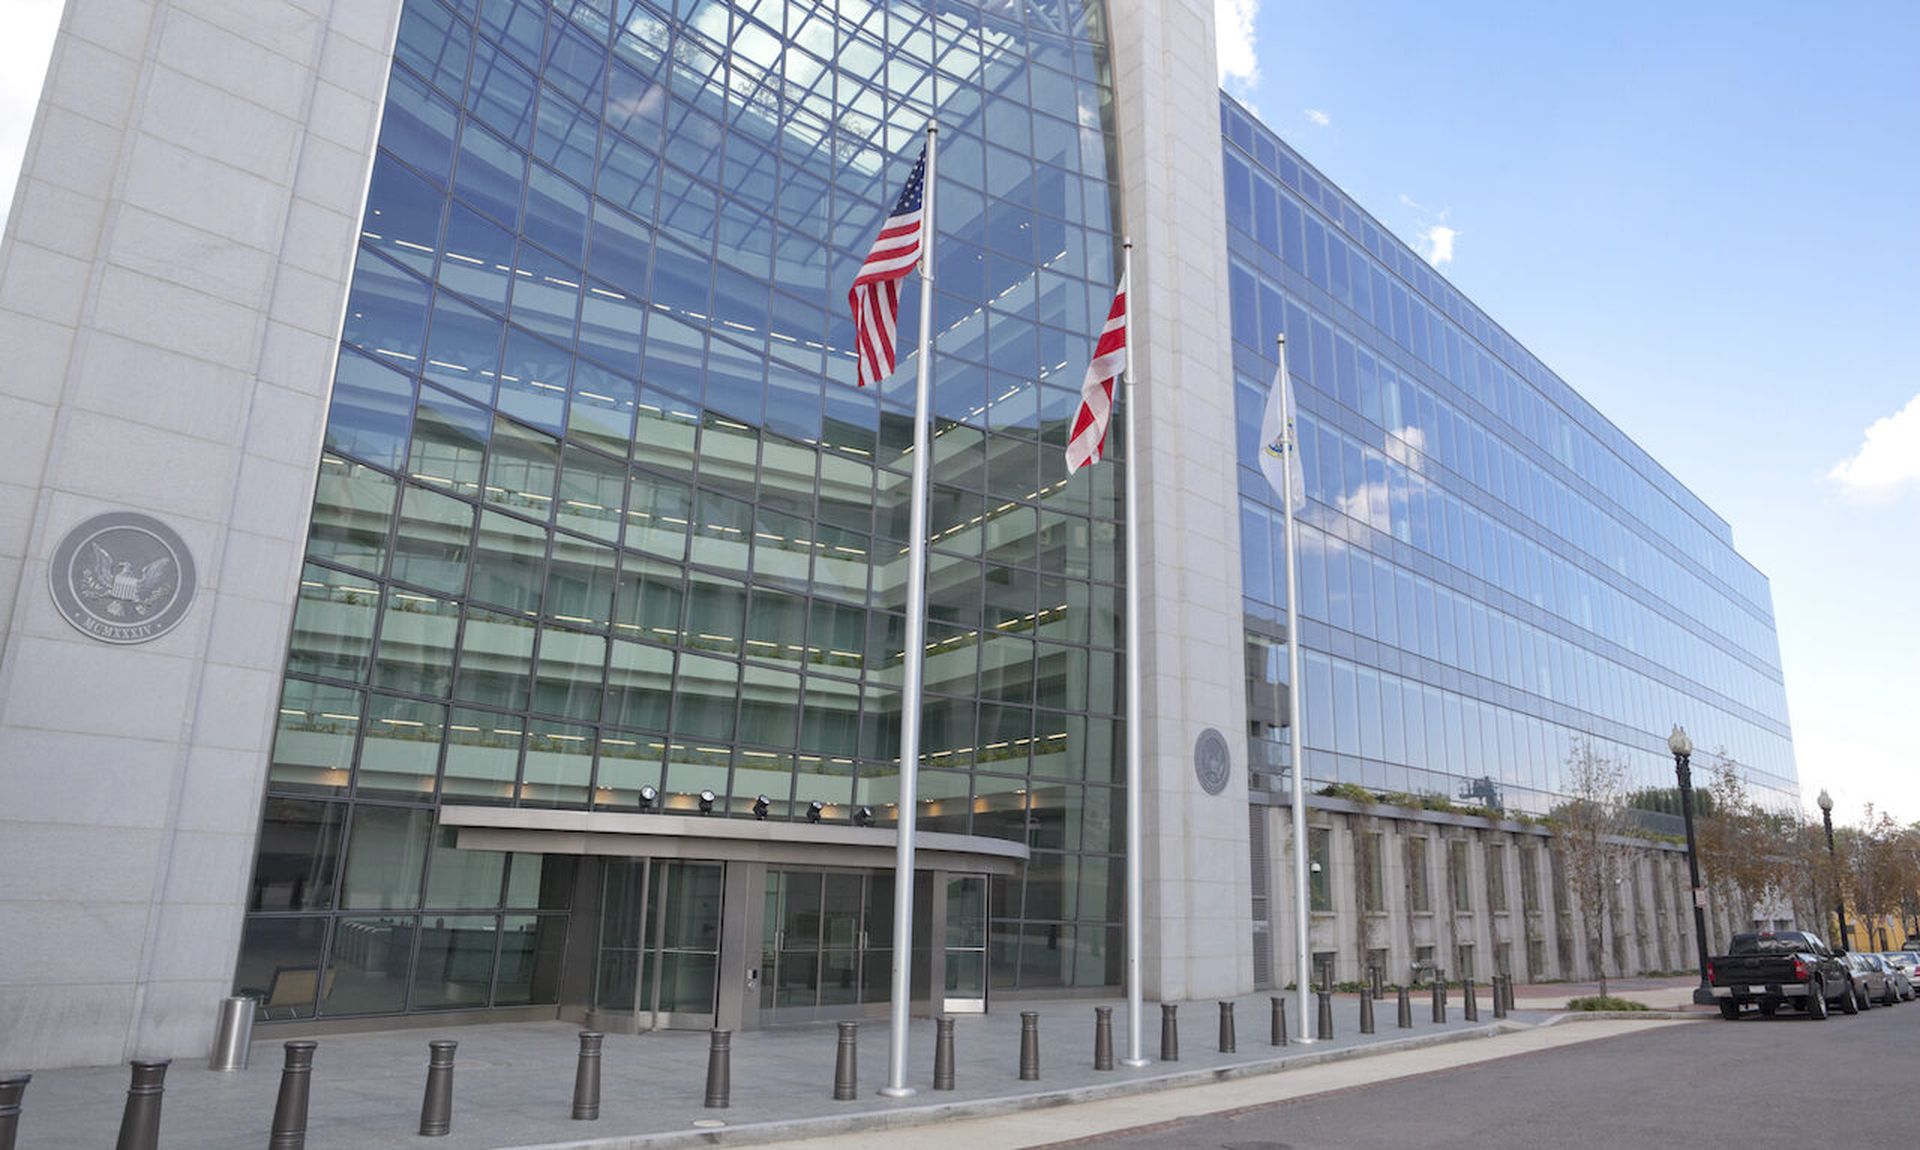 The SEC warned of attacks on client credentials in the fall of 2020, one of the trends that today’s columnist, Stephen Topliss of LexisNexis Risk Solutions, says has continued in 2021, along with automated attacks to steal identities and brute force attacks to access accounts. (Credit: Getty Images)